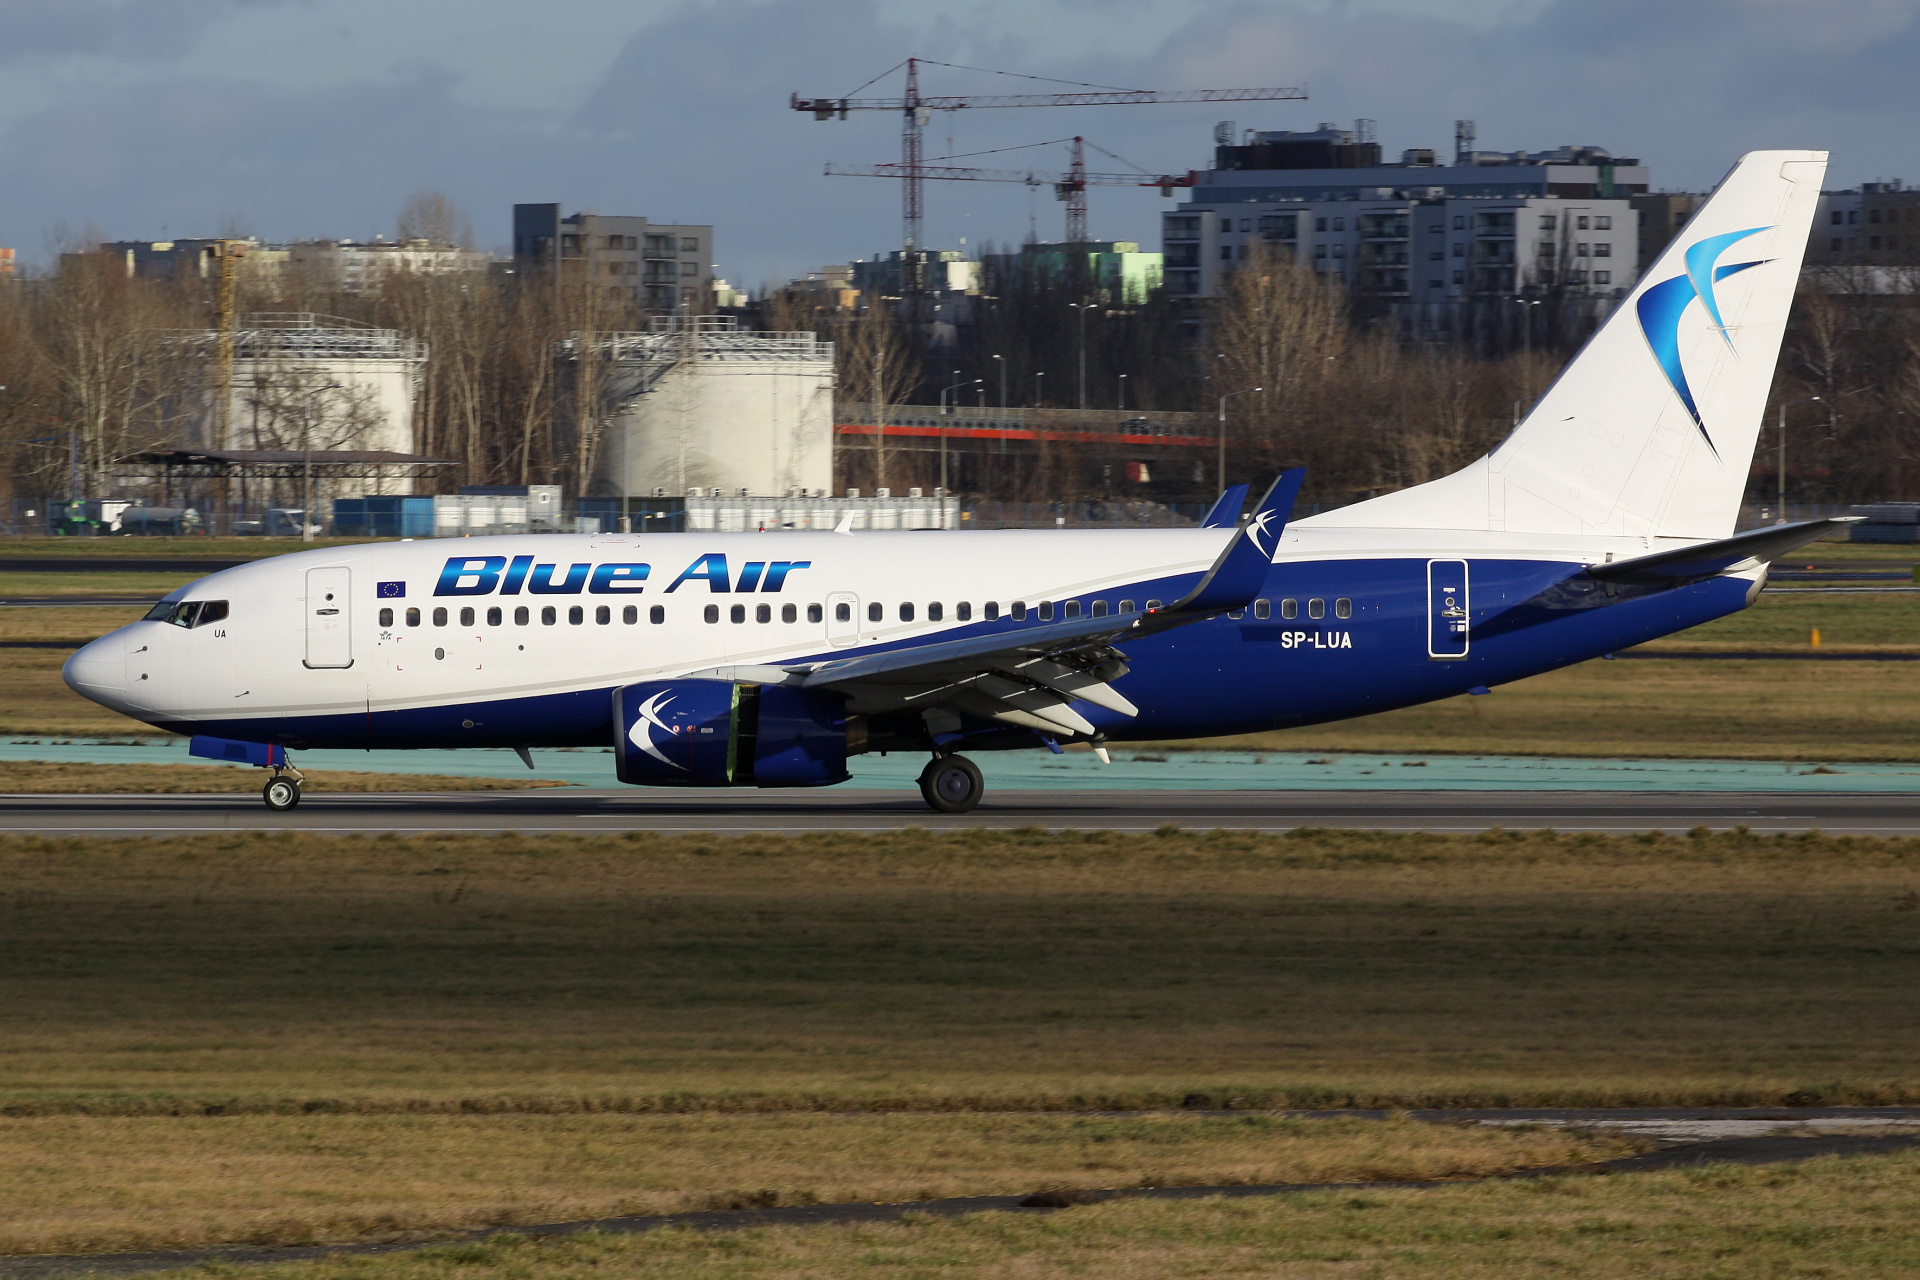 SP-LUA, LOT Polish Airlines (Blue Air) (Aircraft » EPWA Spotting » Boeing 737-700)